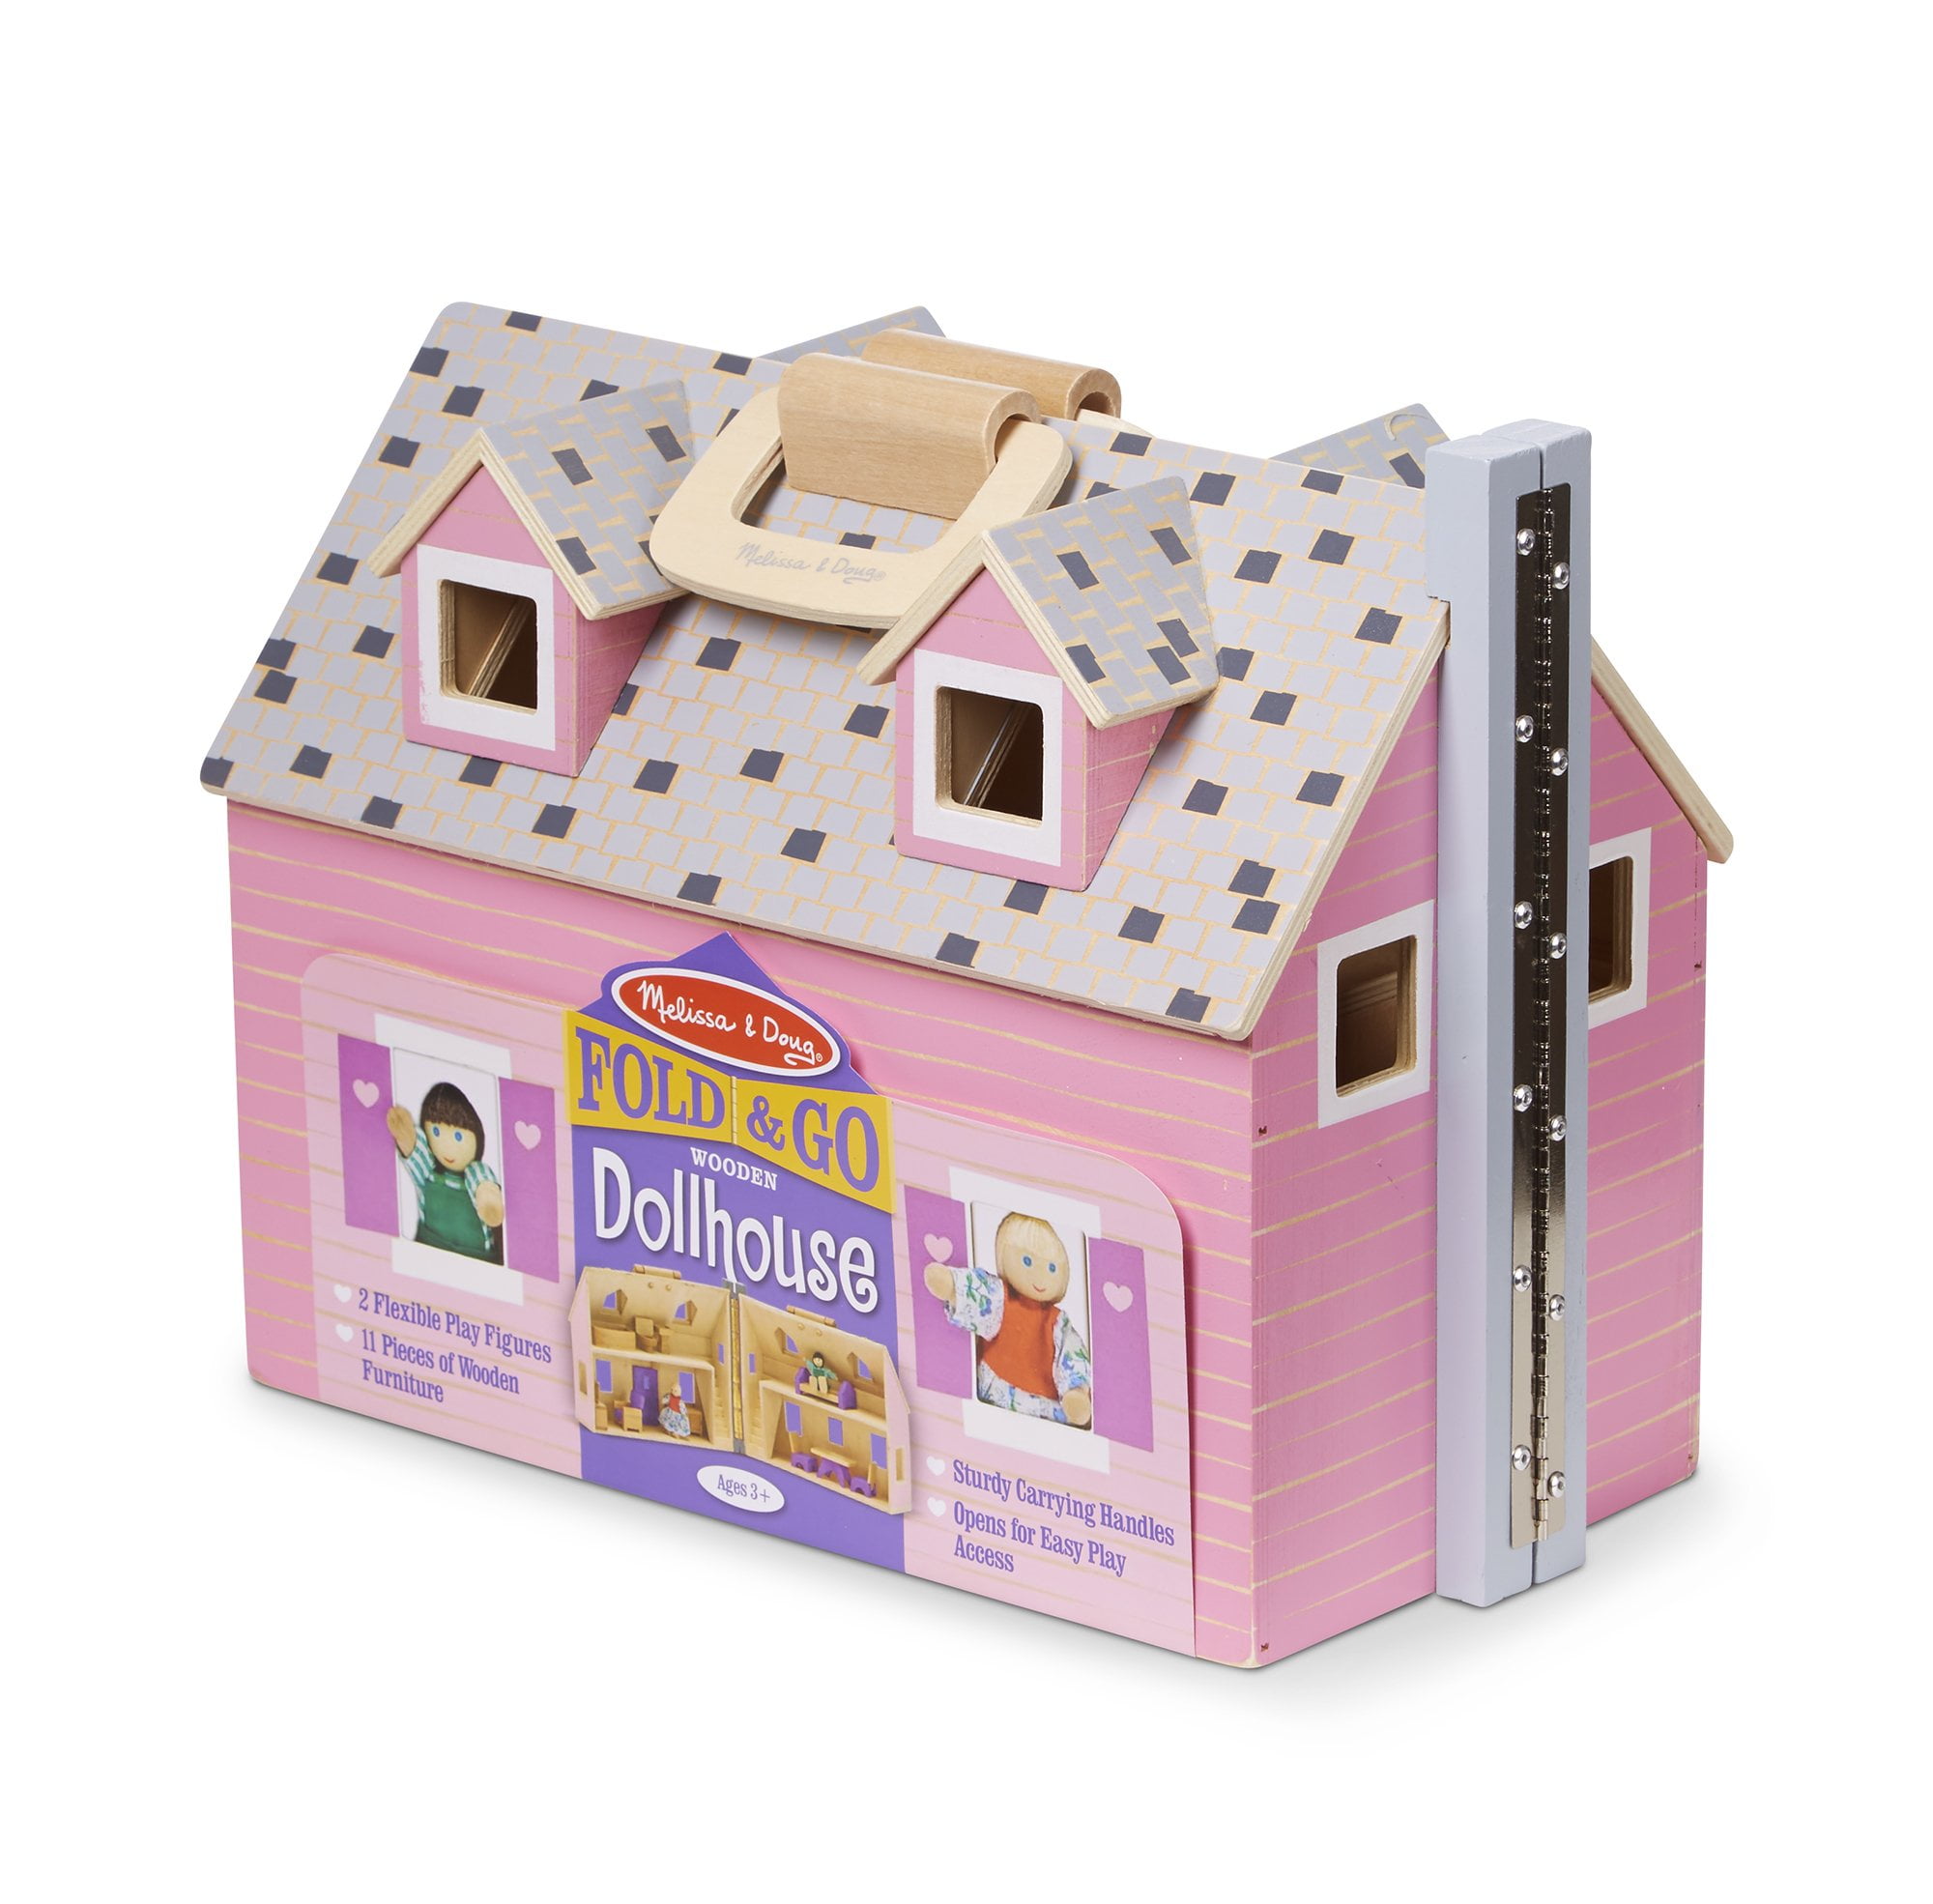 Melissa & Doug Fold and Go Wooden Dollhouse With 2 Dolls and Wooden